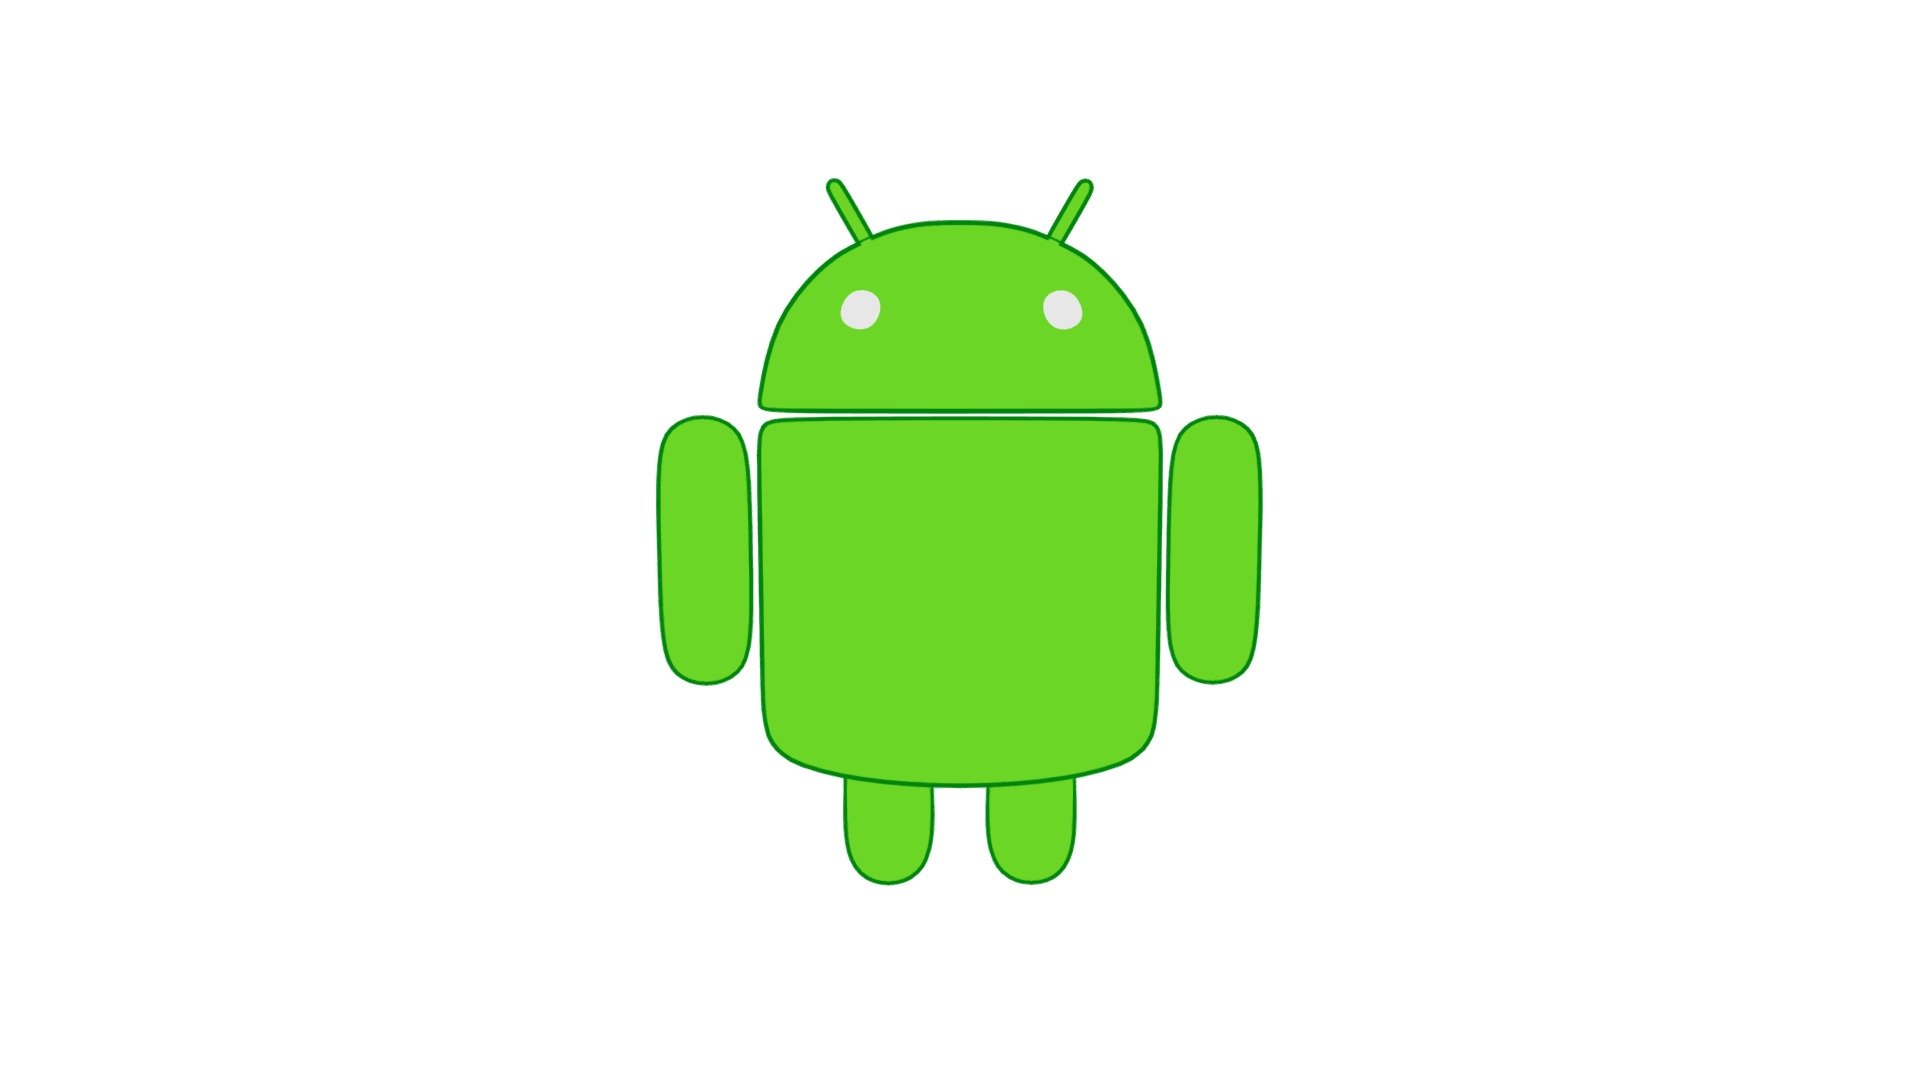 Android (Google)